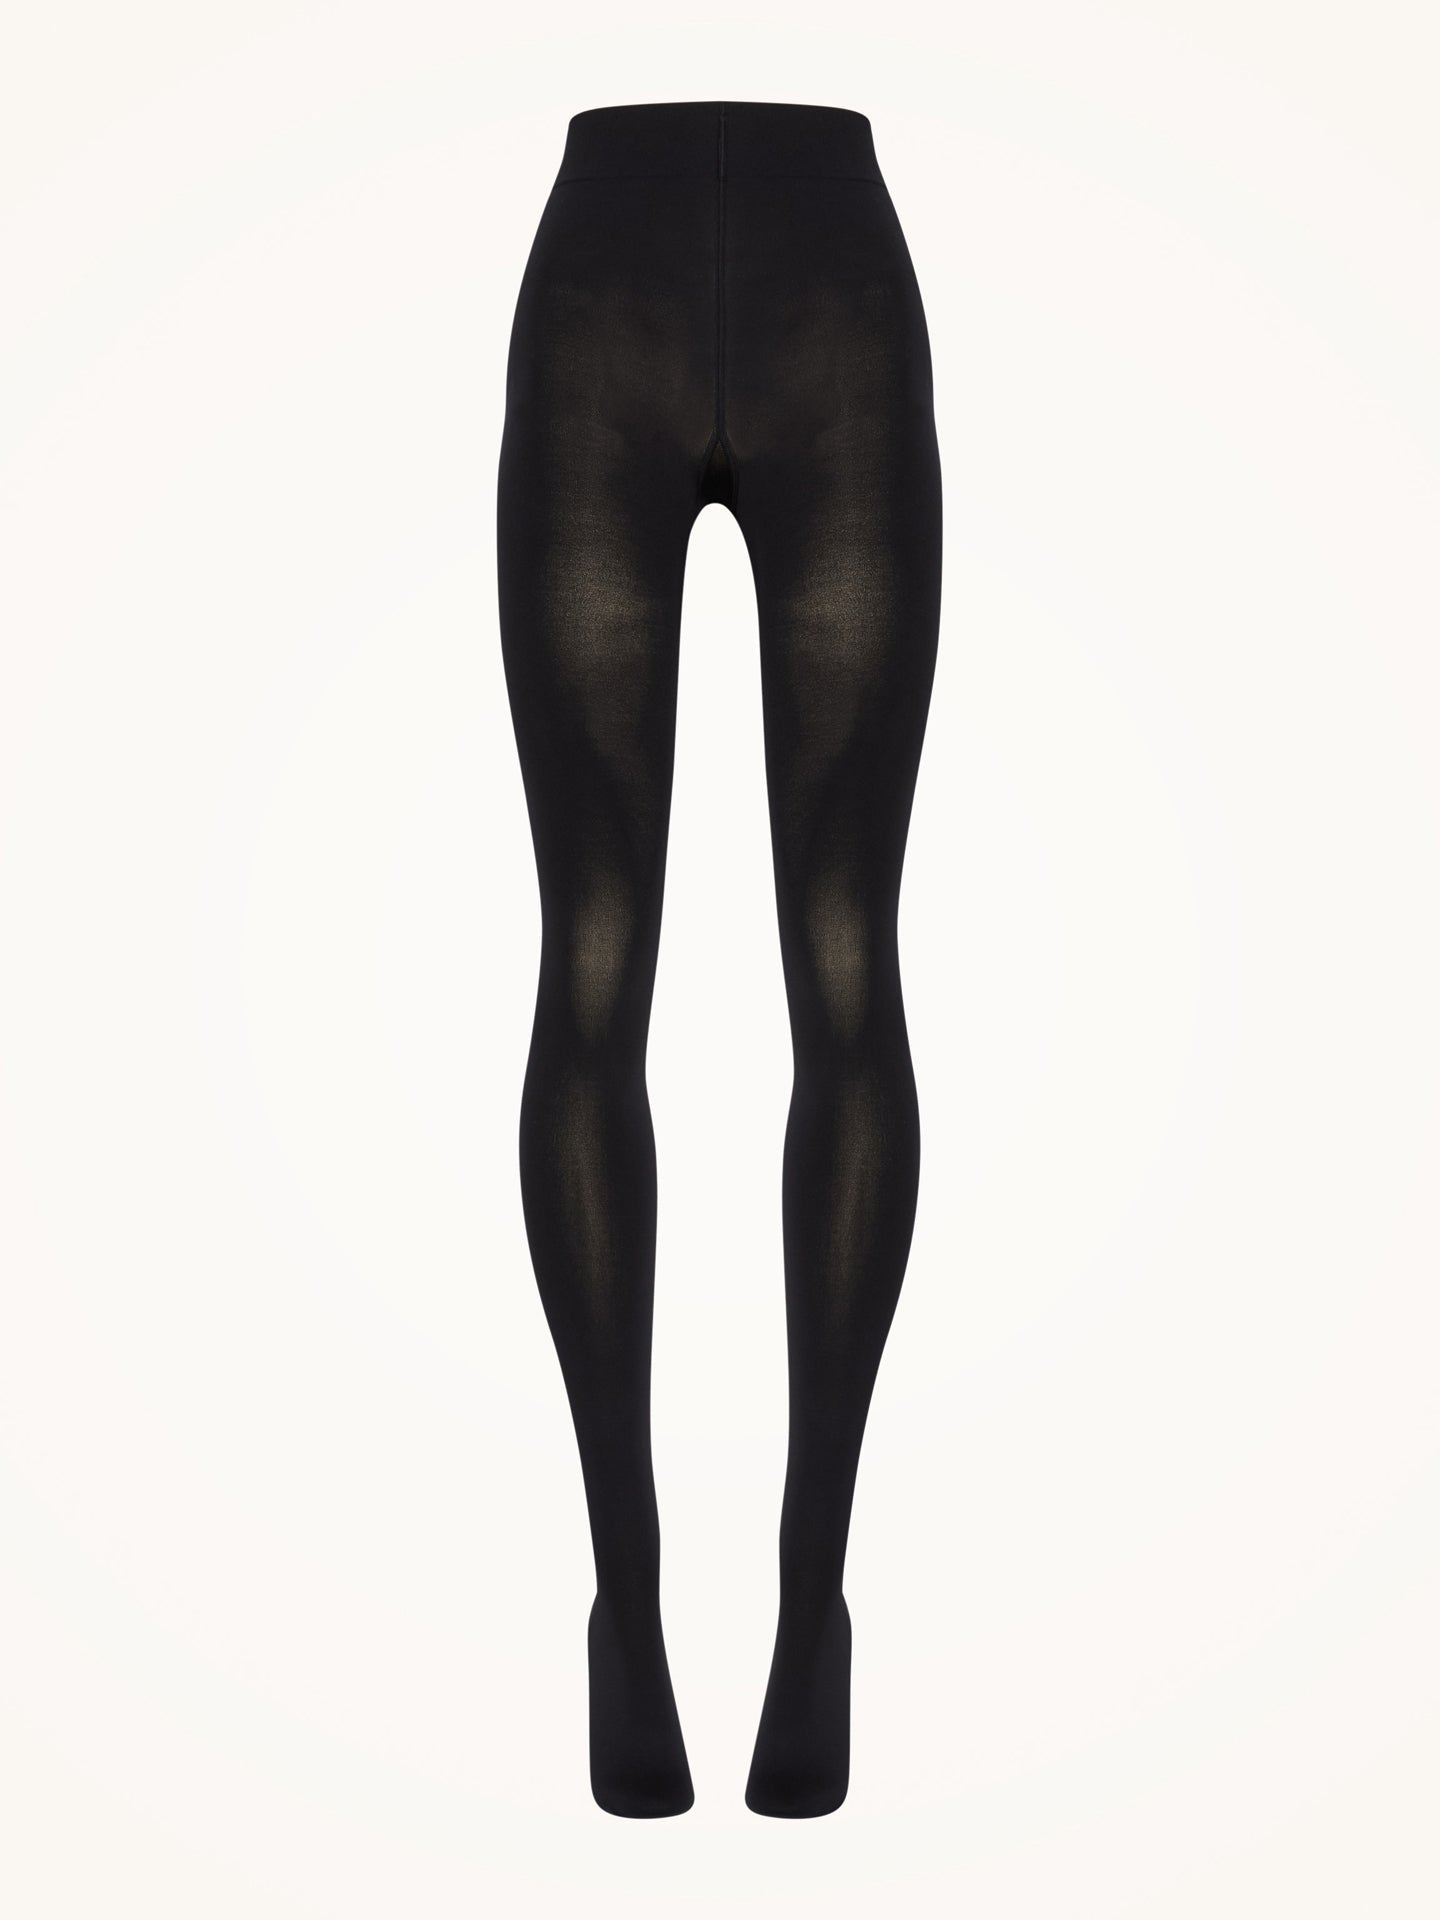 Velvet 66 leg support Tights-Strumpfhose-Wolford-OUTLET-ARCHIVIST